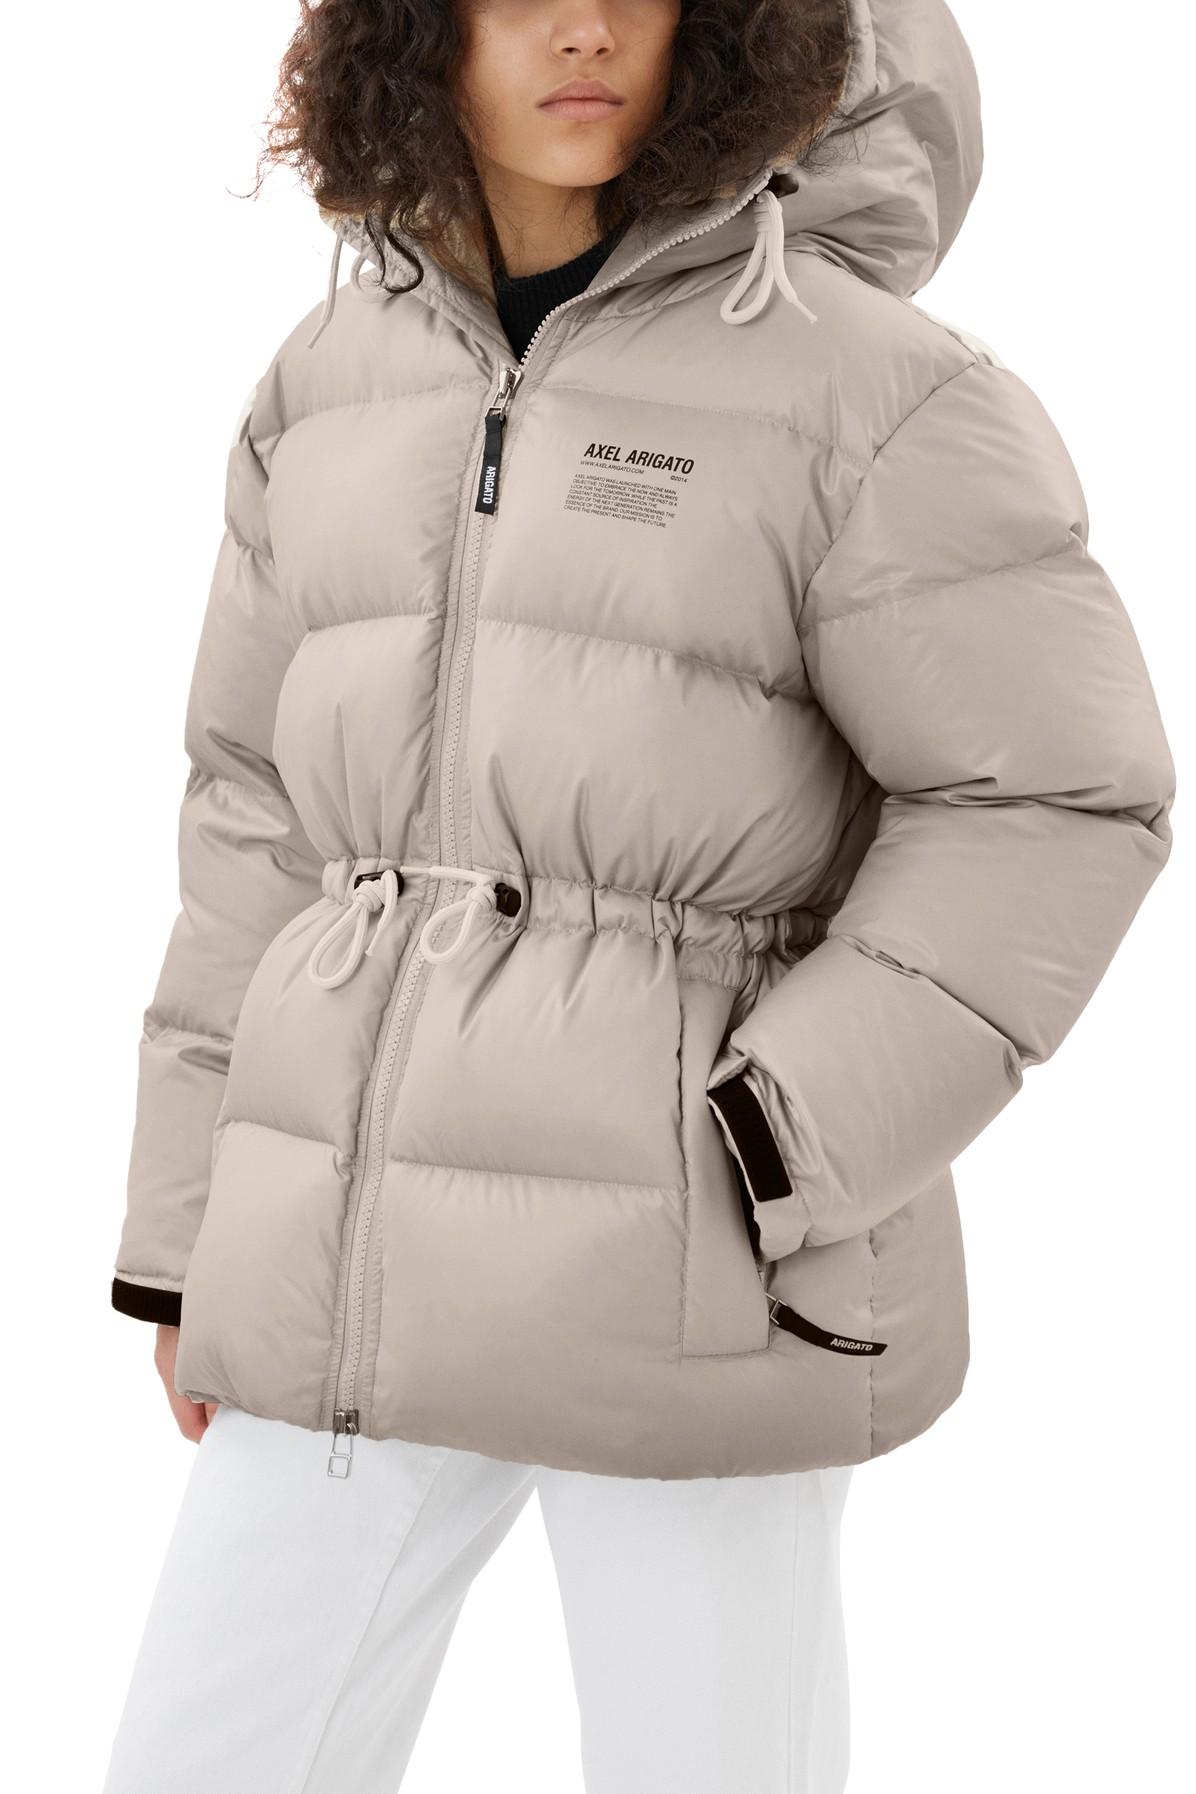 Axel Arigato Rhode Down Jacket in Natural | Lyst